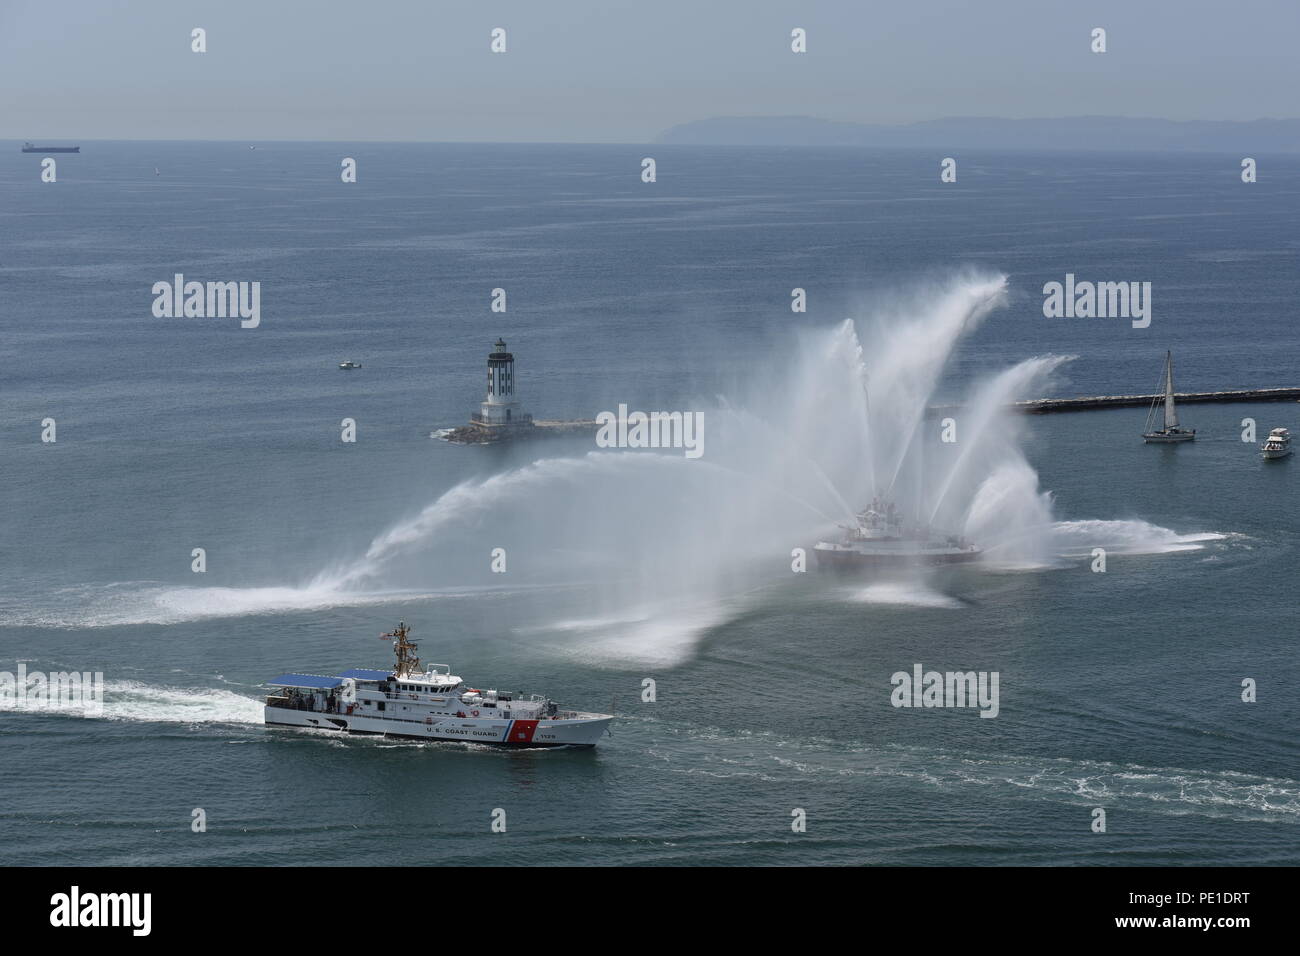 The Coast Guard Cutter Forrest Rednour, passes by the Angels Gate Light House in San Pedro, California, Aug. 11, 2018. Three additional Fast-Response Cutters are scheduled to arrive to California and be commissioned by summer of 2019. U.S. Coast Guard Petty Officer 3rd Class DaVonte' Marrow. Stock Photo